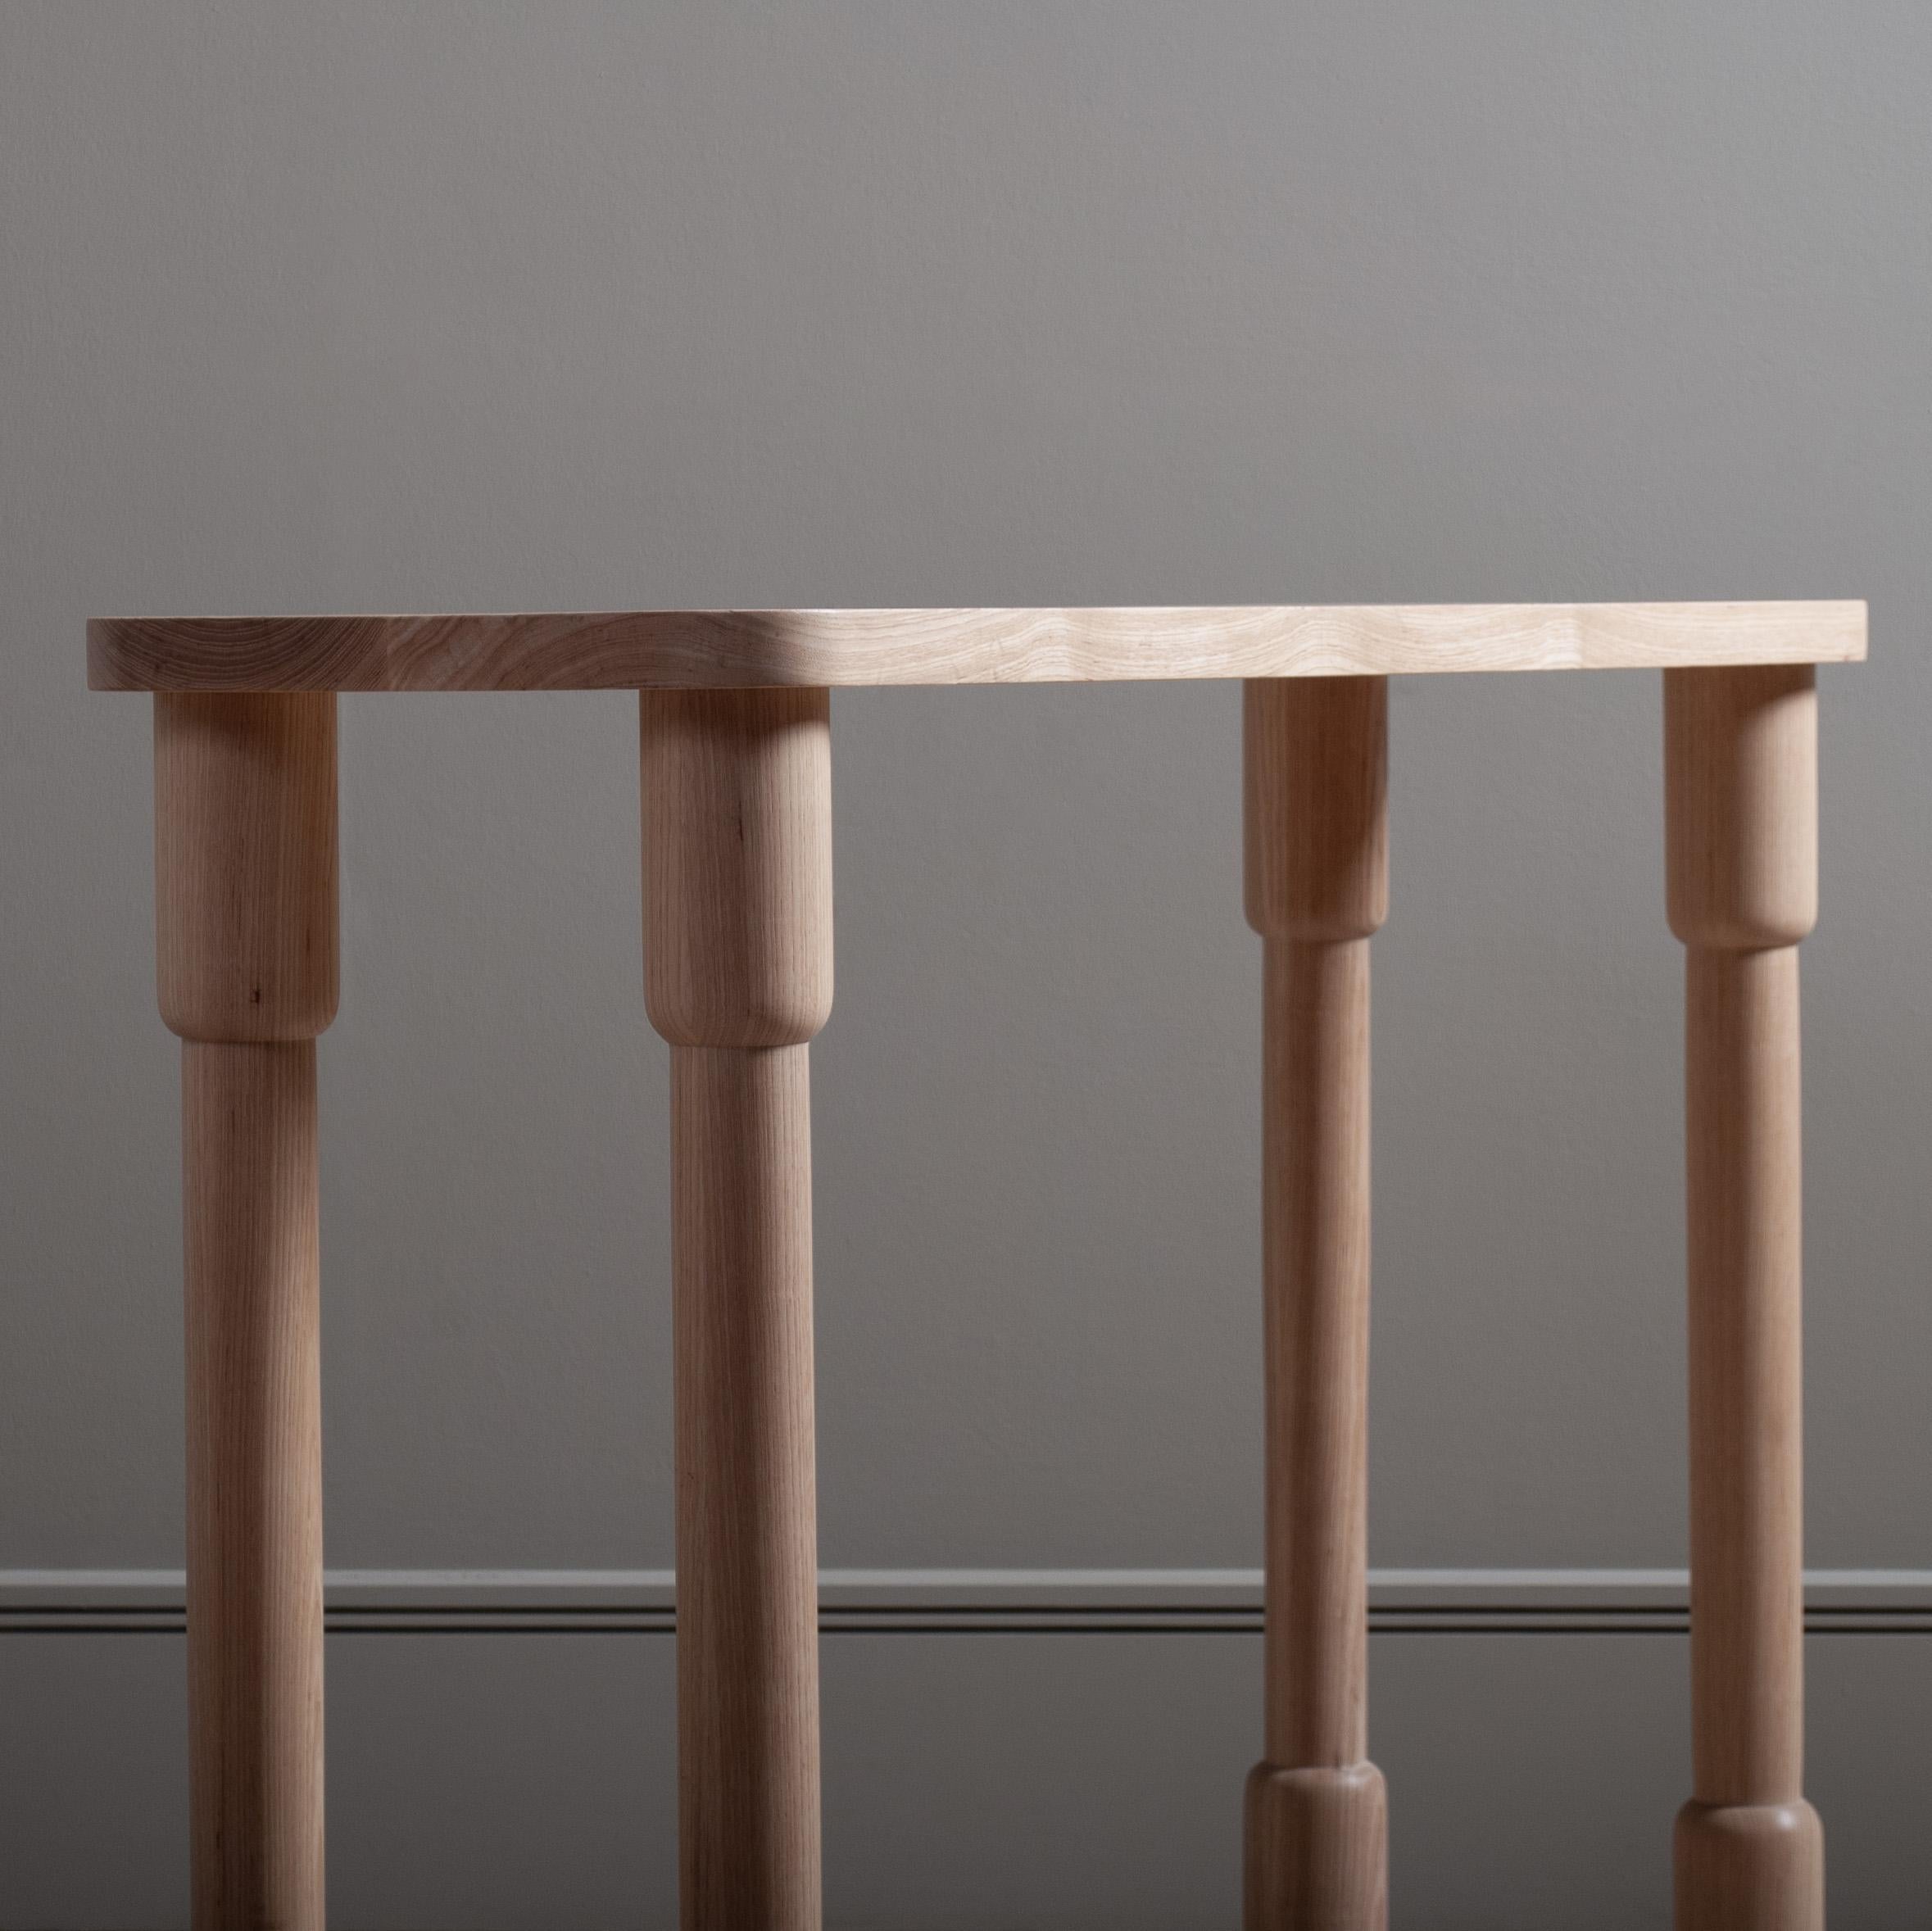 Architectural maunsell console table designed and handmade in England using traditional furniture making techniques. Completely handcrafted from prime English ash. Hand-turned legs jointed through and flush to the main surface.
A solid and striking